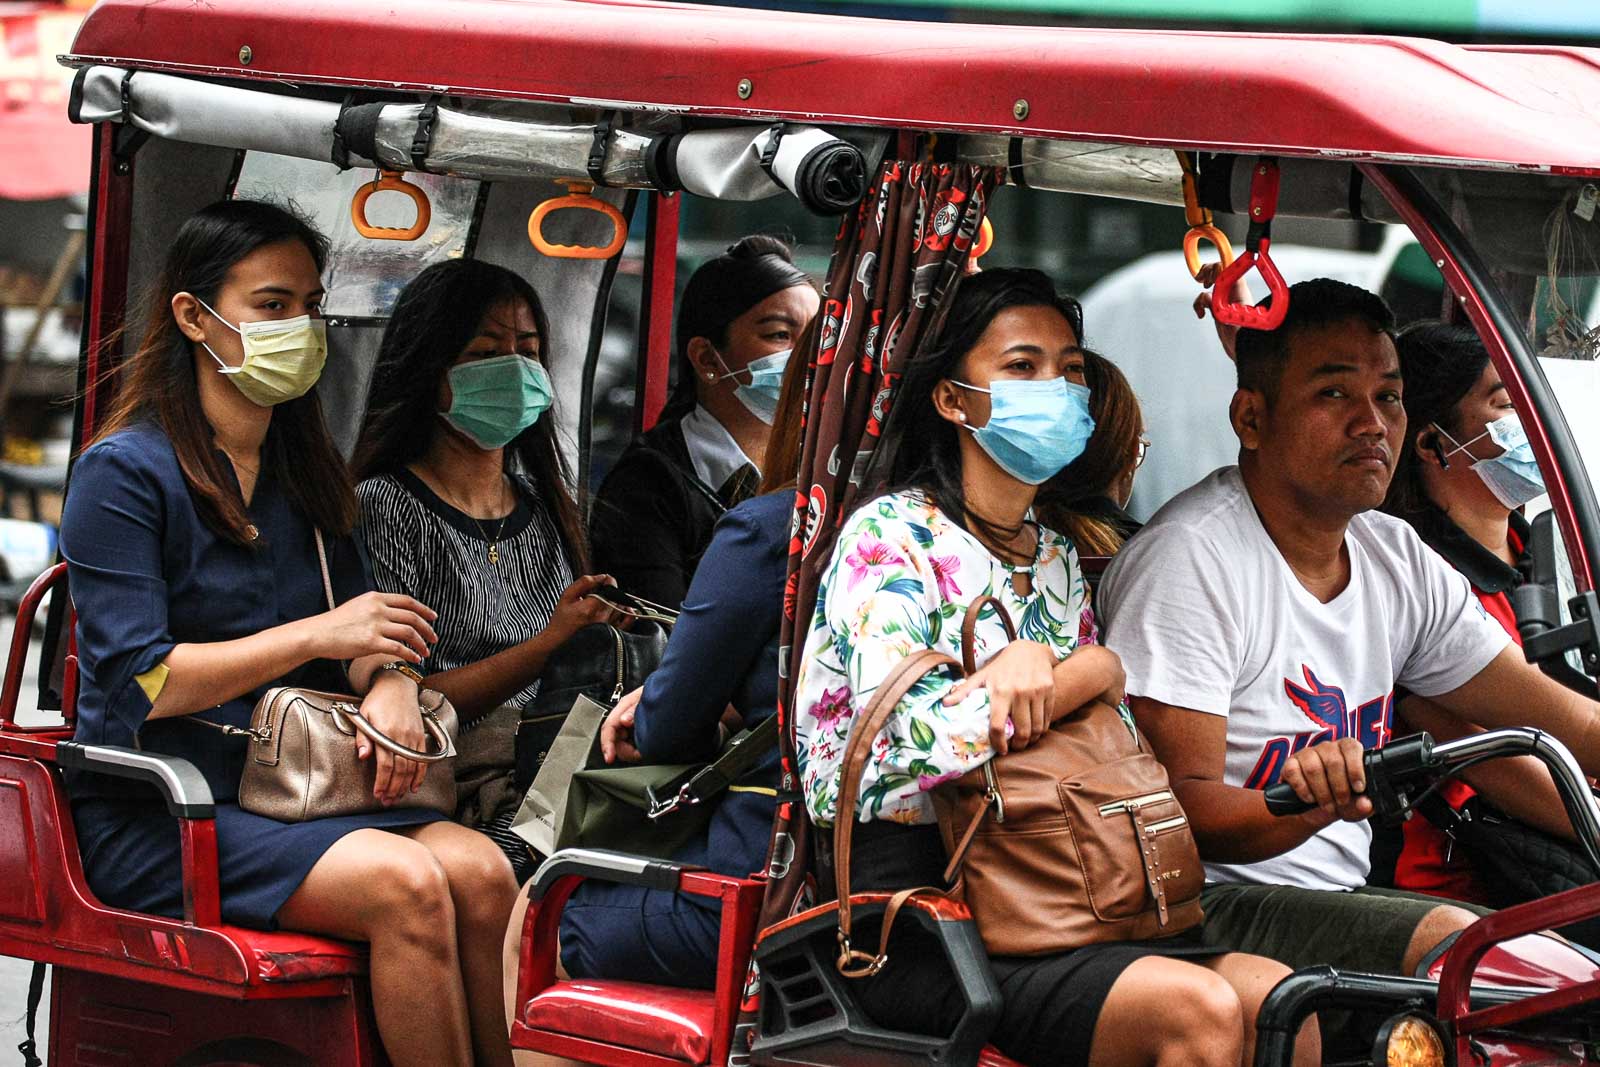 PROTECTION. Metro Manila commuters wear face masks as protection from the coronavirus on February 3, 2020. Photo by Jire Carreon/Rappler 